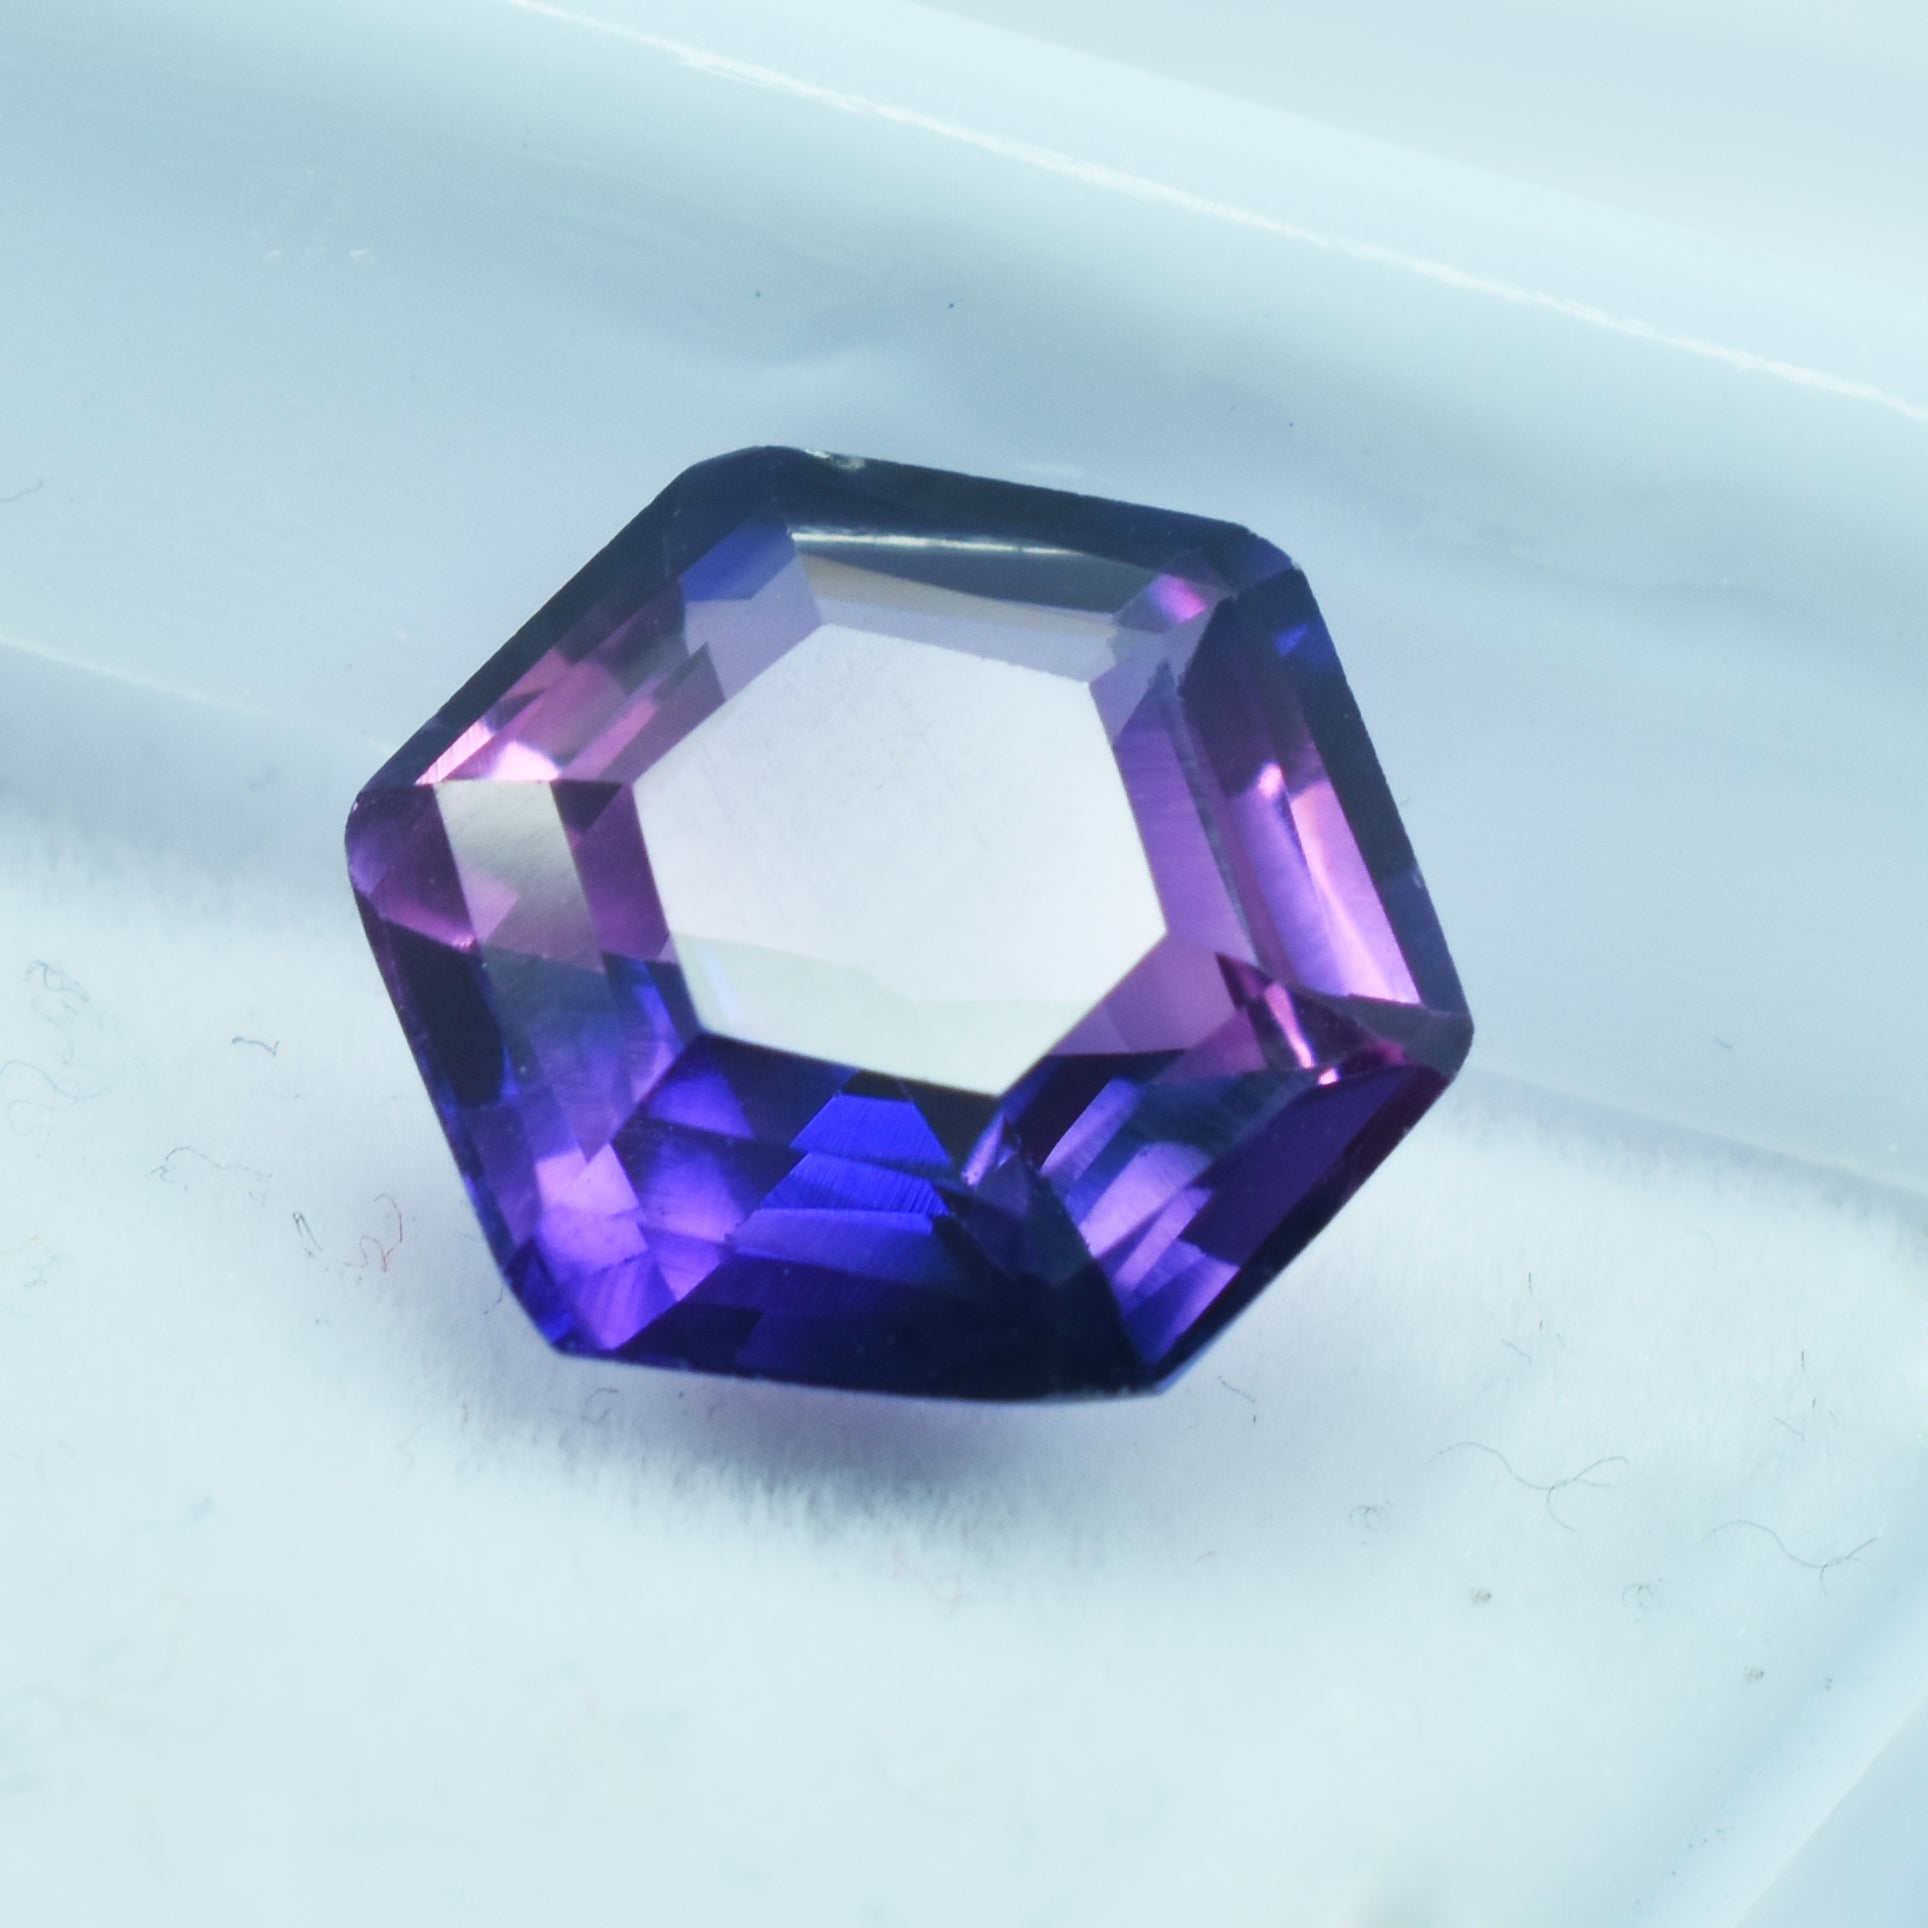 BRILLIANT OFFER !! Sapphire Beautiful Jewelry Natural 10.55 Carat Fancy Shape Purple Color Change Sapphire Certified Loose Gemstone ,September Sapphire Gem | FREE Delivery FREE Gift | Exclusive Offer